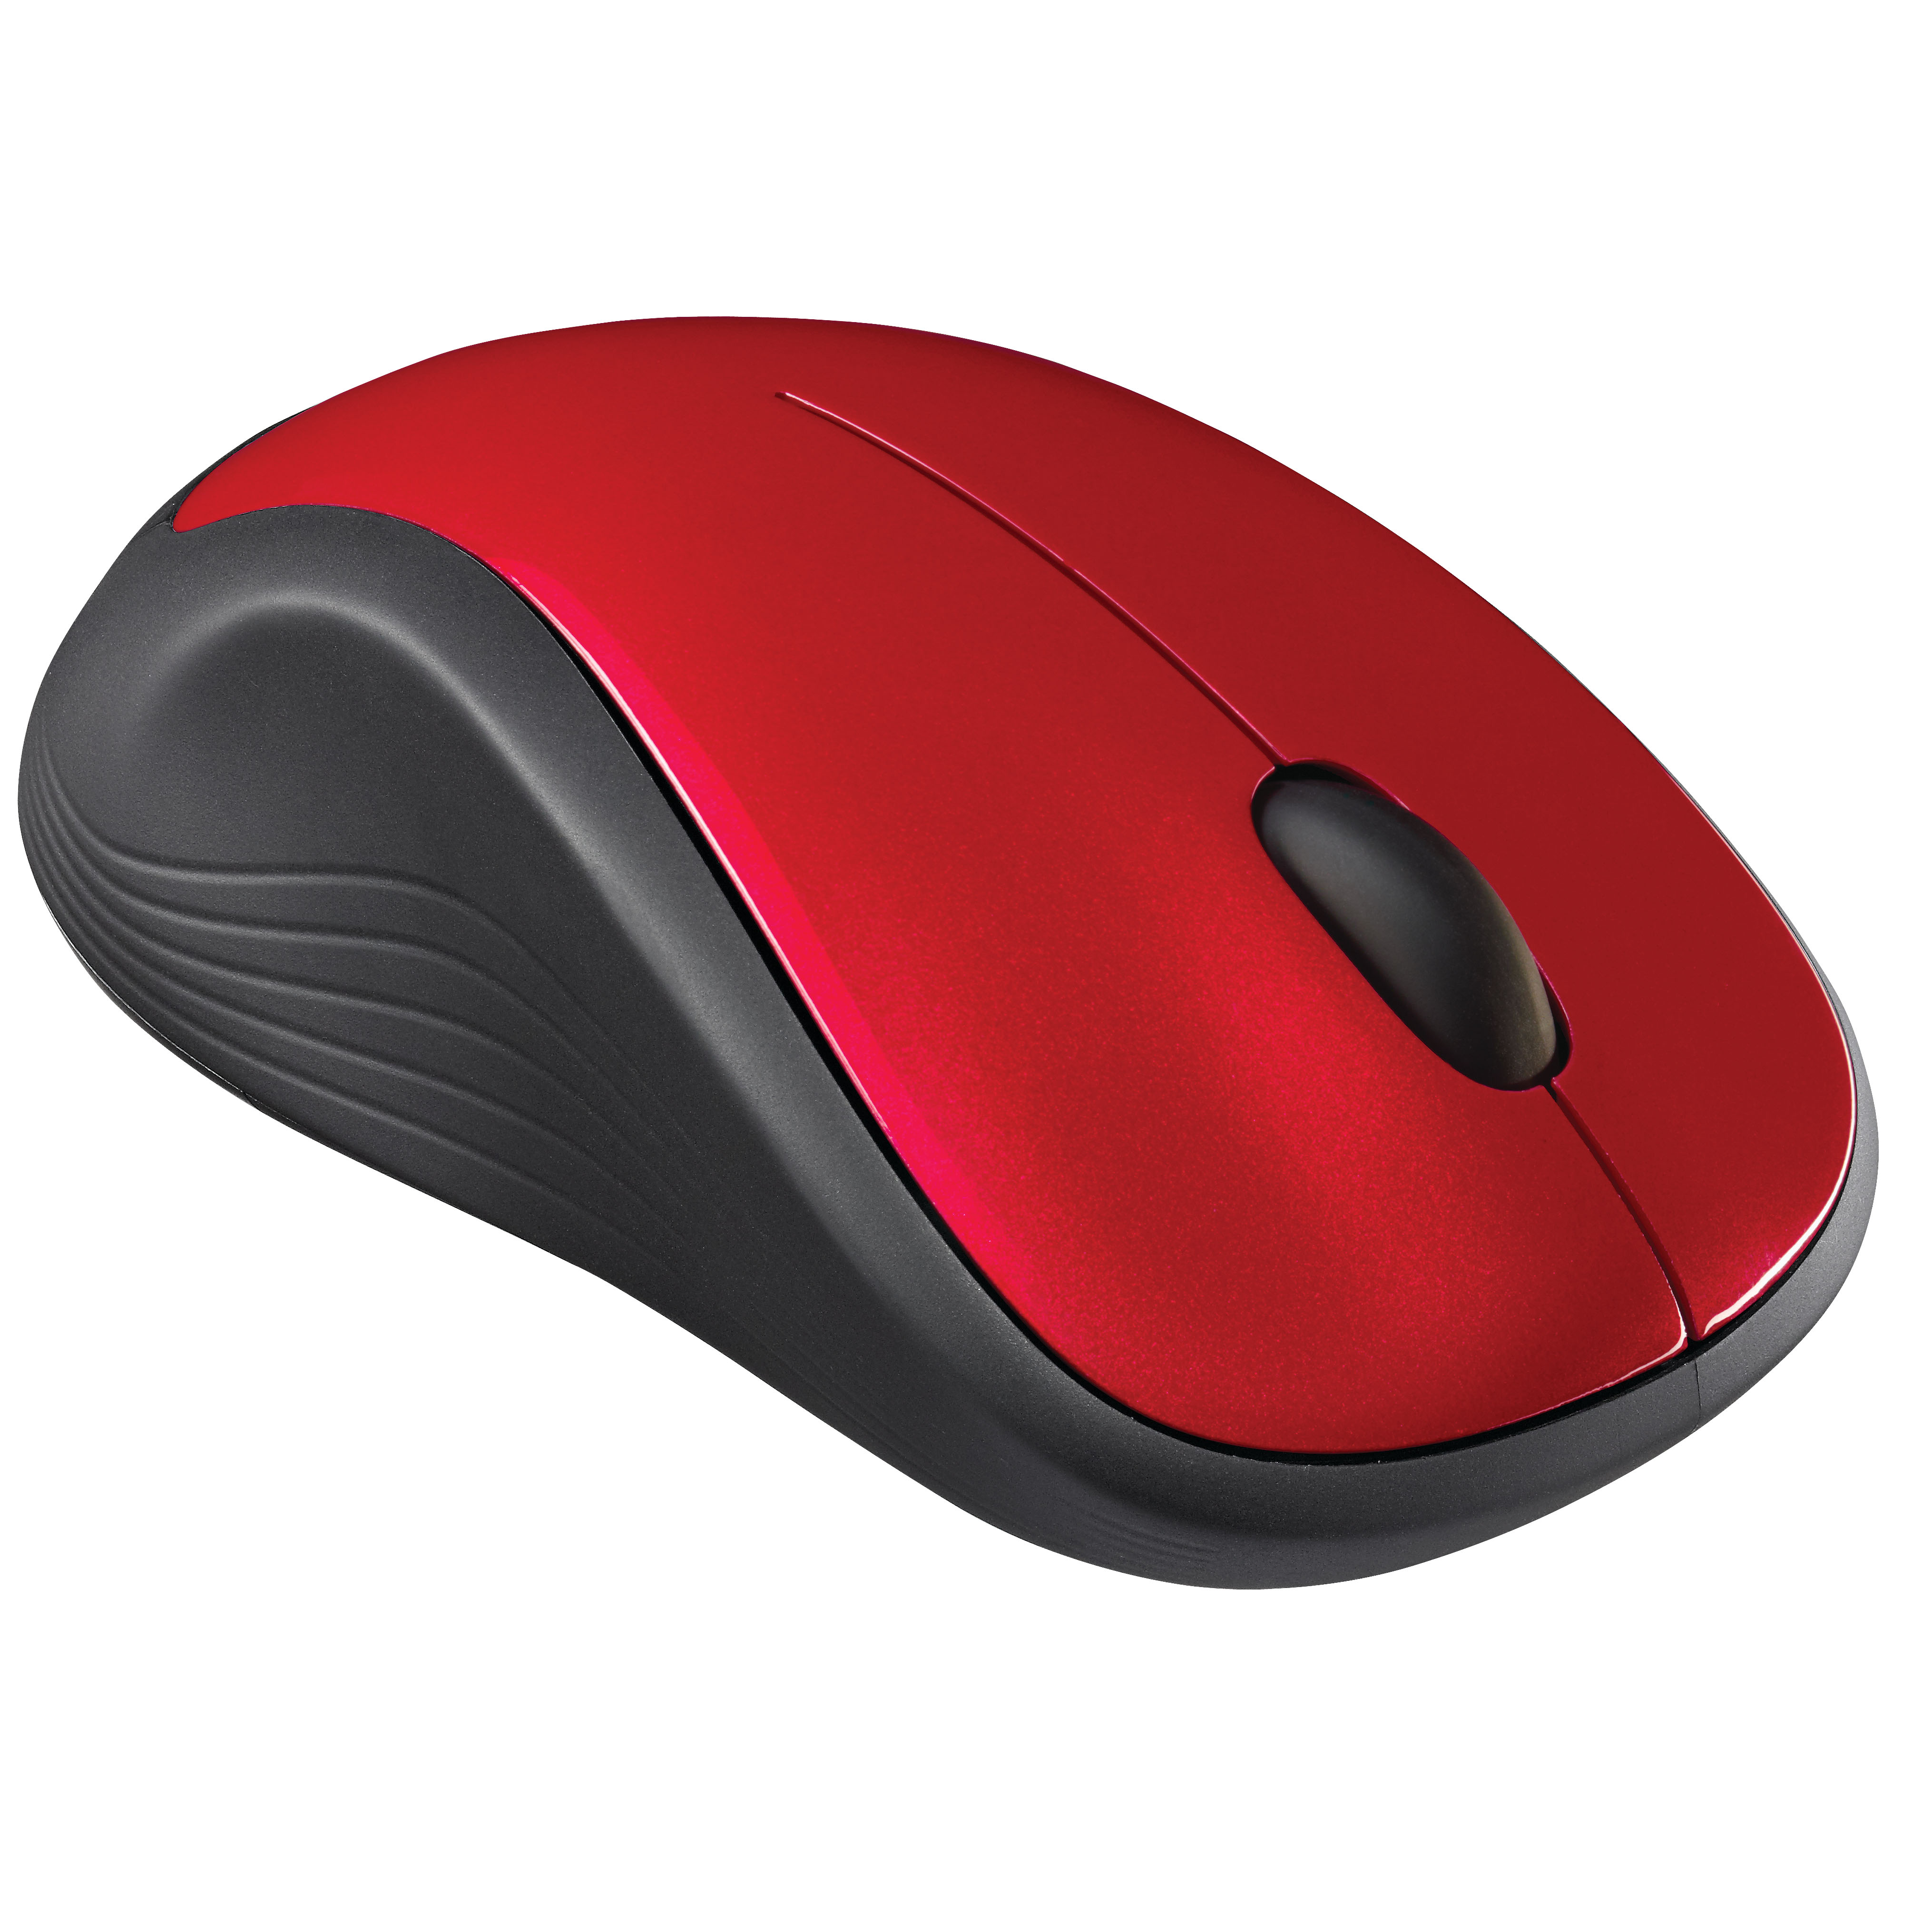 Logitech Full-Size Wireless Mouse, USB Nano Receiver, 1000 DPI Optical Tracking, Ambidextrous, Red - image 3 of 5